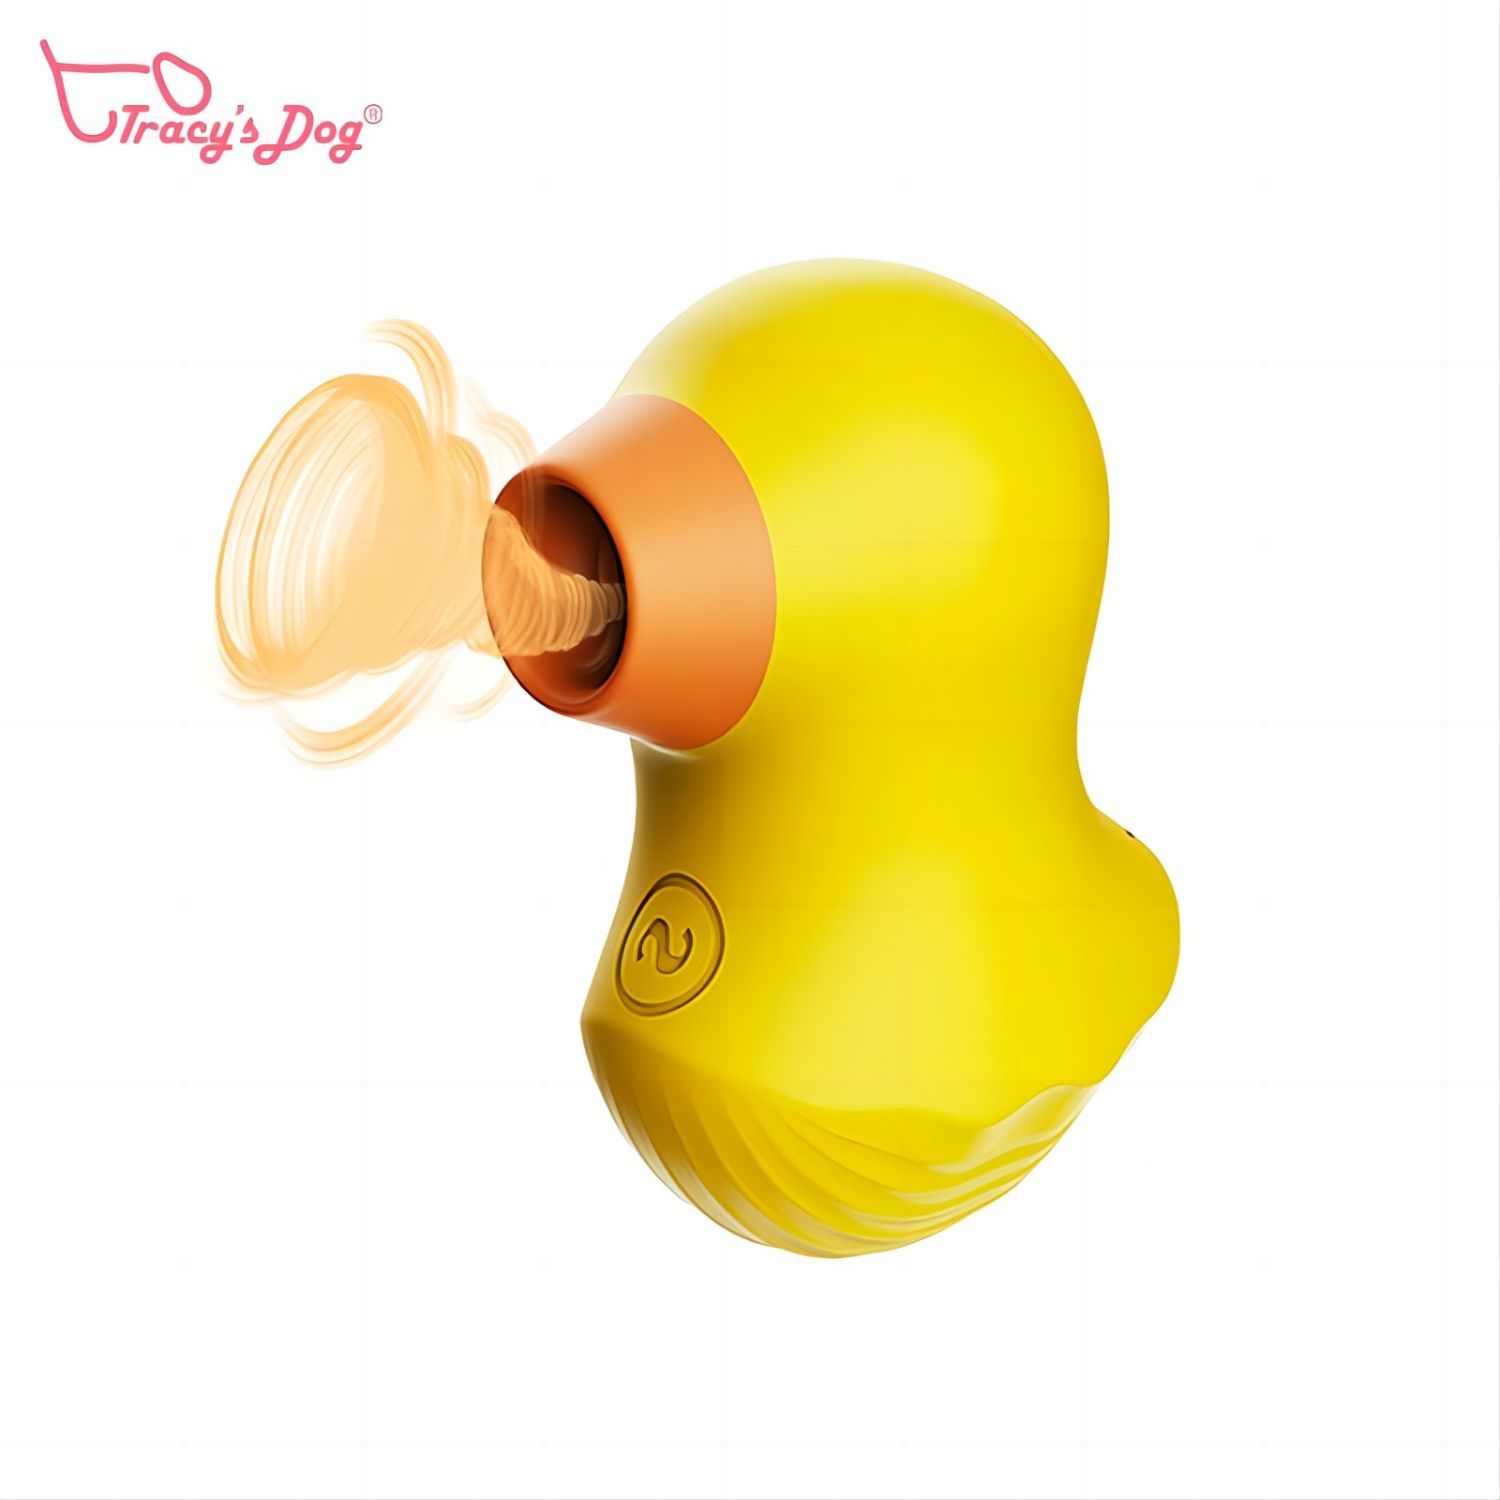 Tracy's Dog - Mr Duckie Clitoral Sucking Vibrator - EasyToys